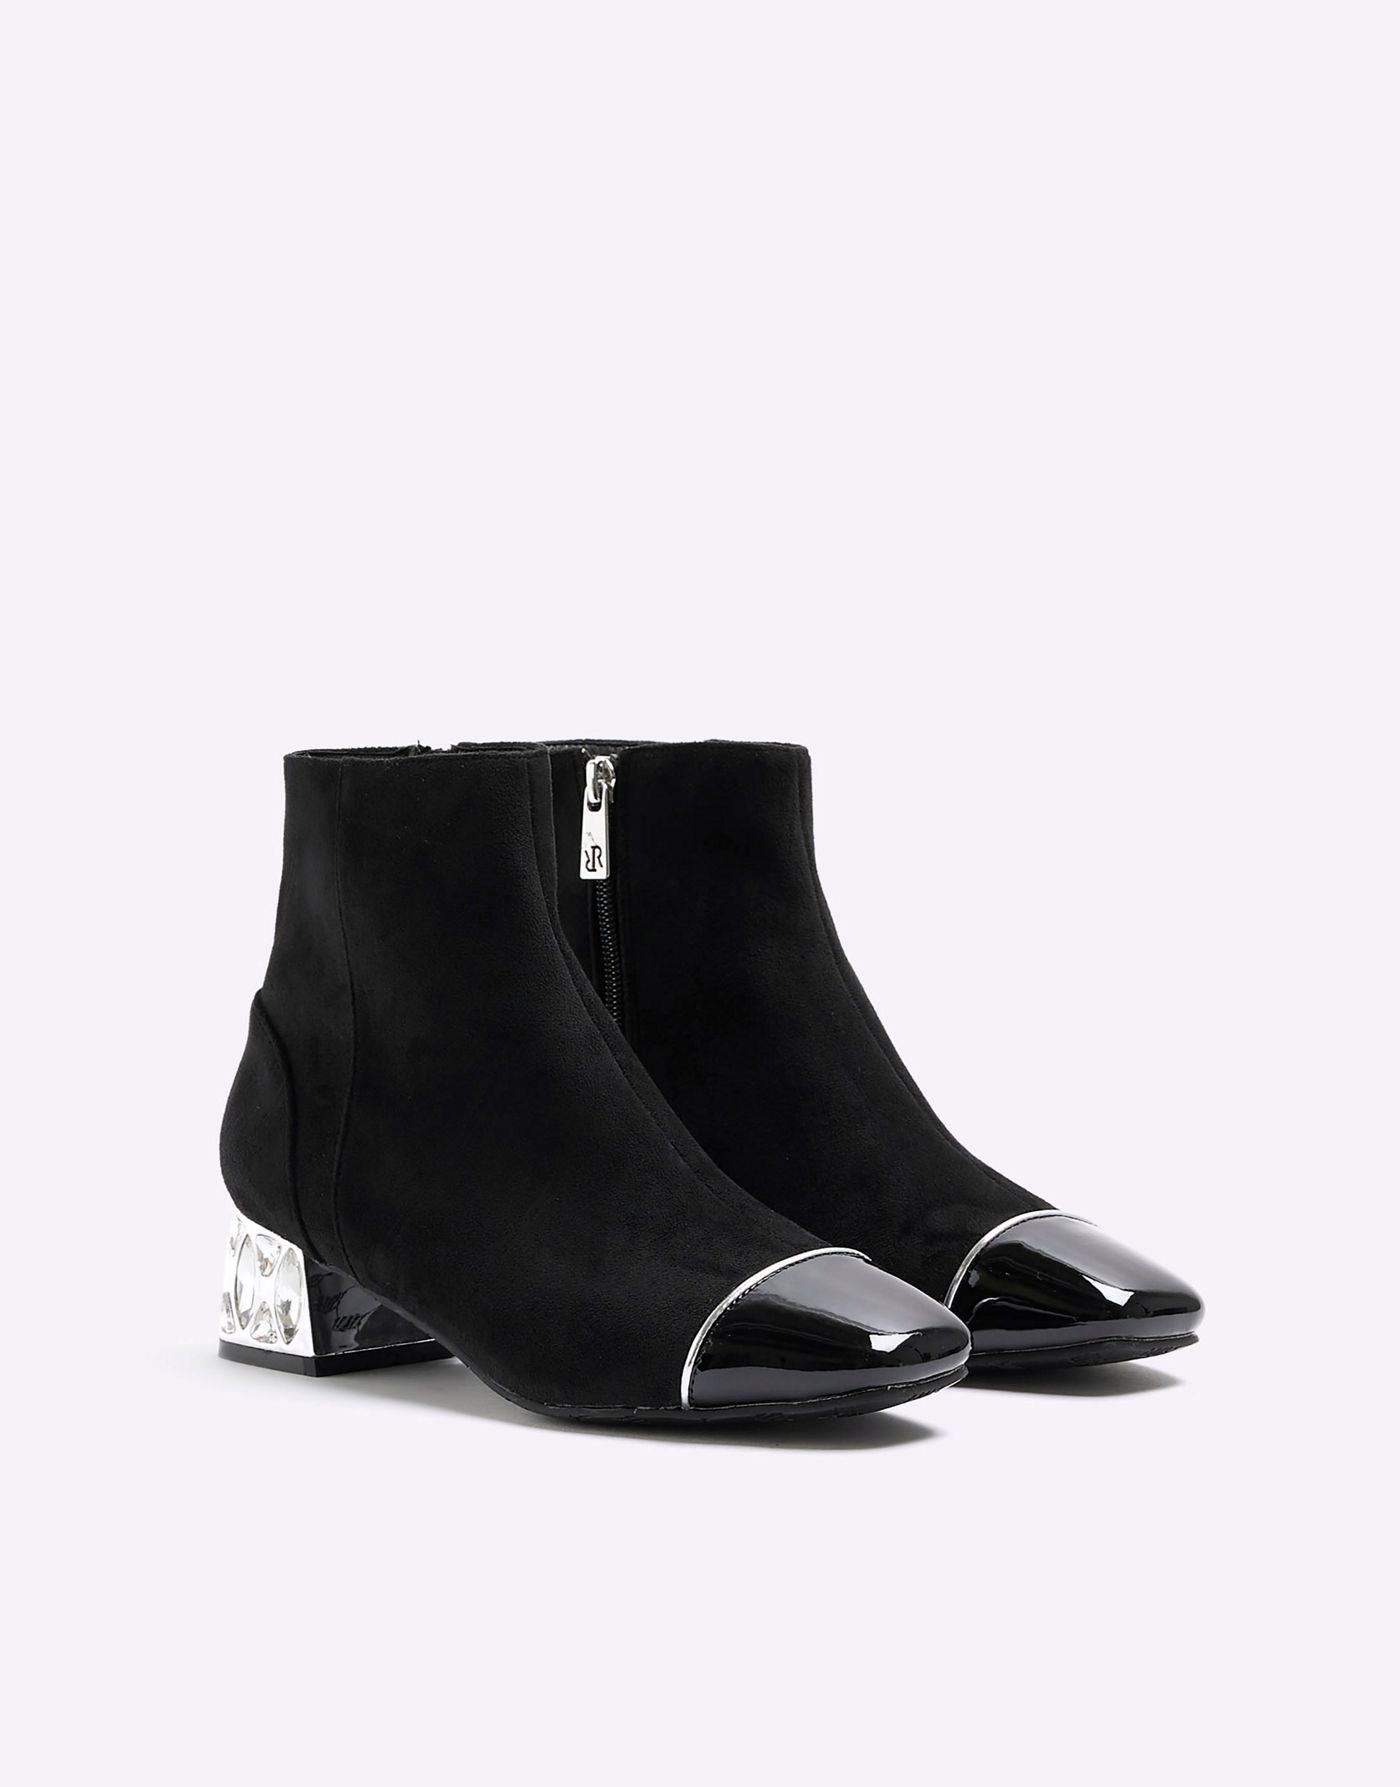 River Island Suedette diamante heel ankle boots in black